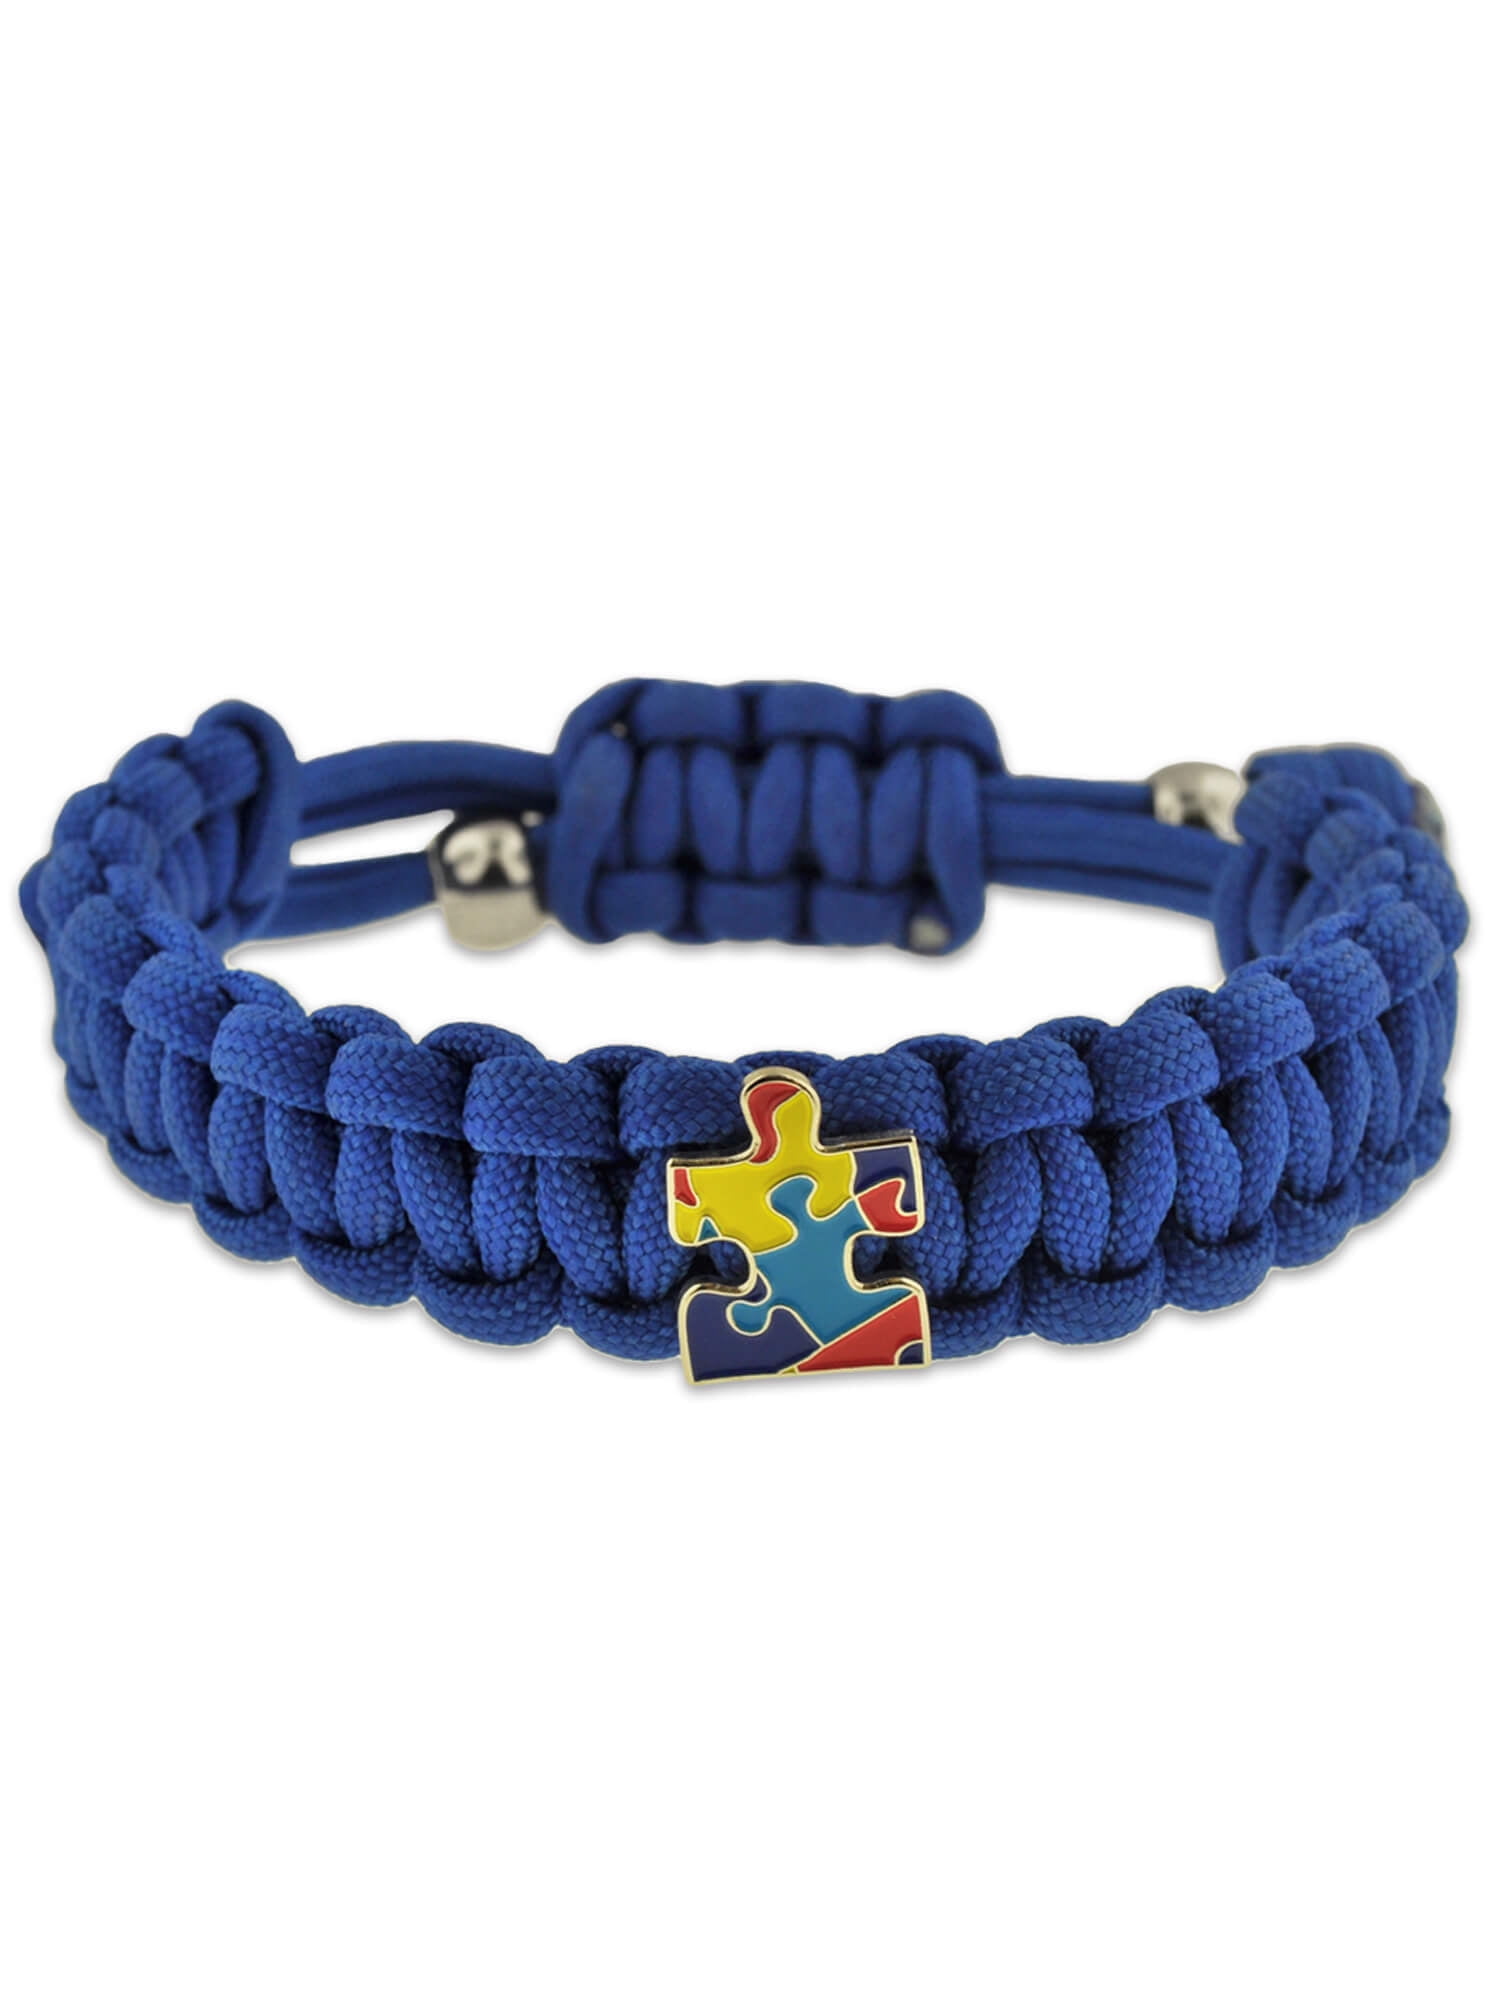 Sparkling Pride Leather Bracelet For Kids With Autism Awareness Fashionable  Wristband Bangle For Boys And Girls Bulk Order Available From Commo_dpp,  $0.78 | DHgate.Com